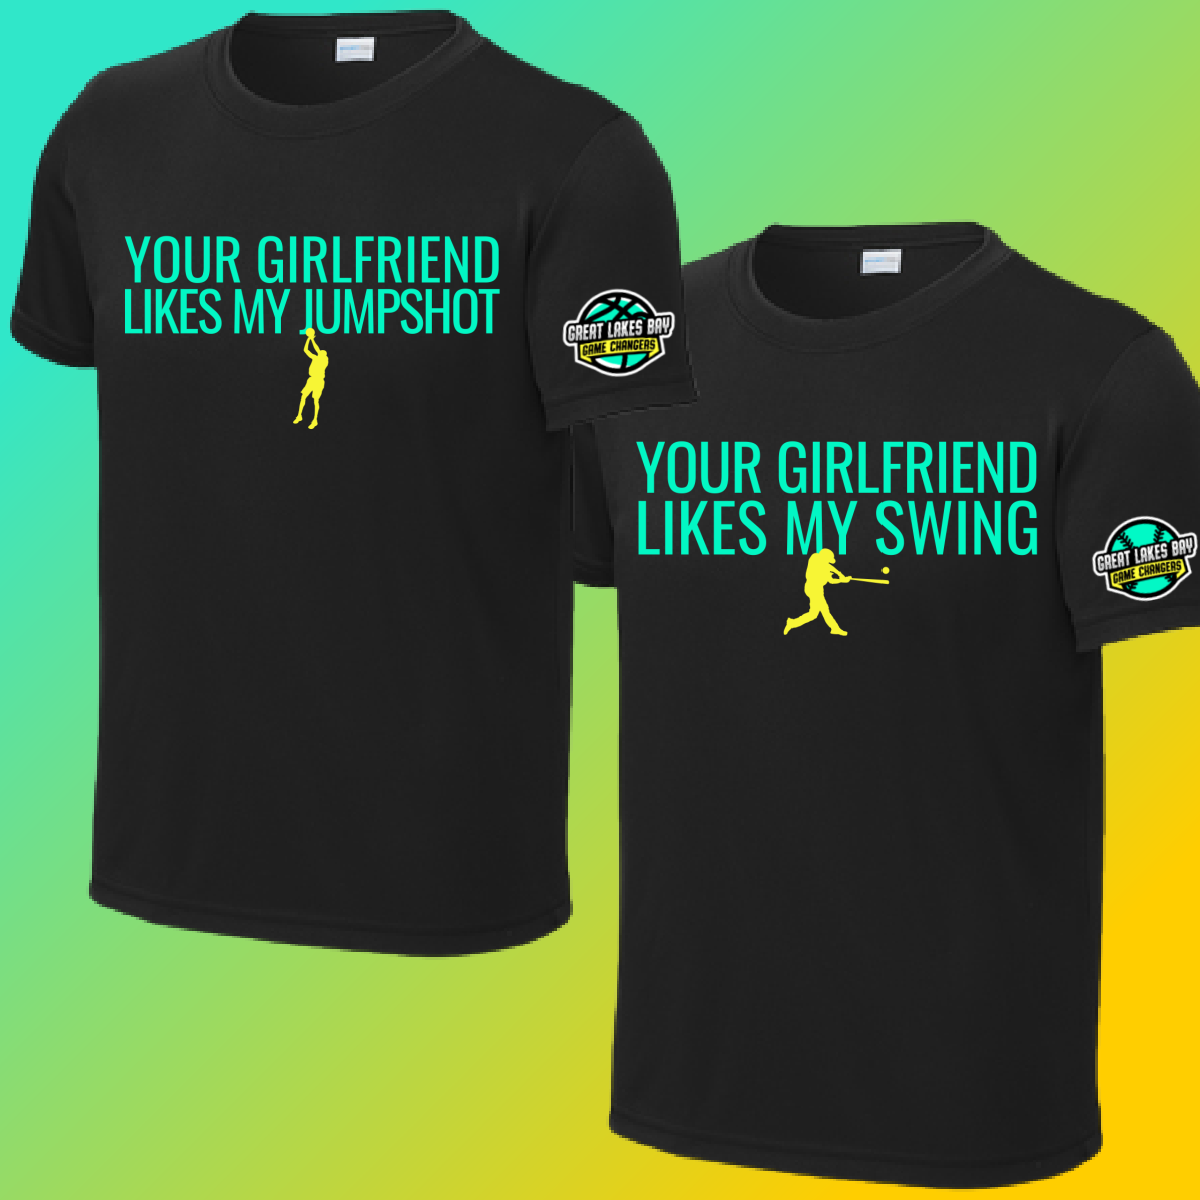 Great Lakes Bay Game Changers Your Girlfriend Likes My Jumpshot/Swing - Graphic Tee